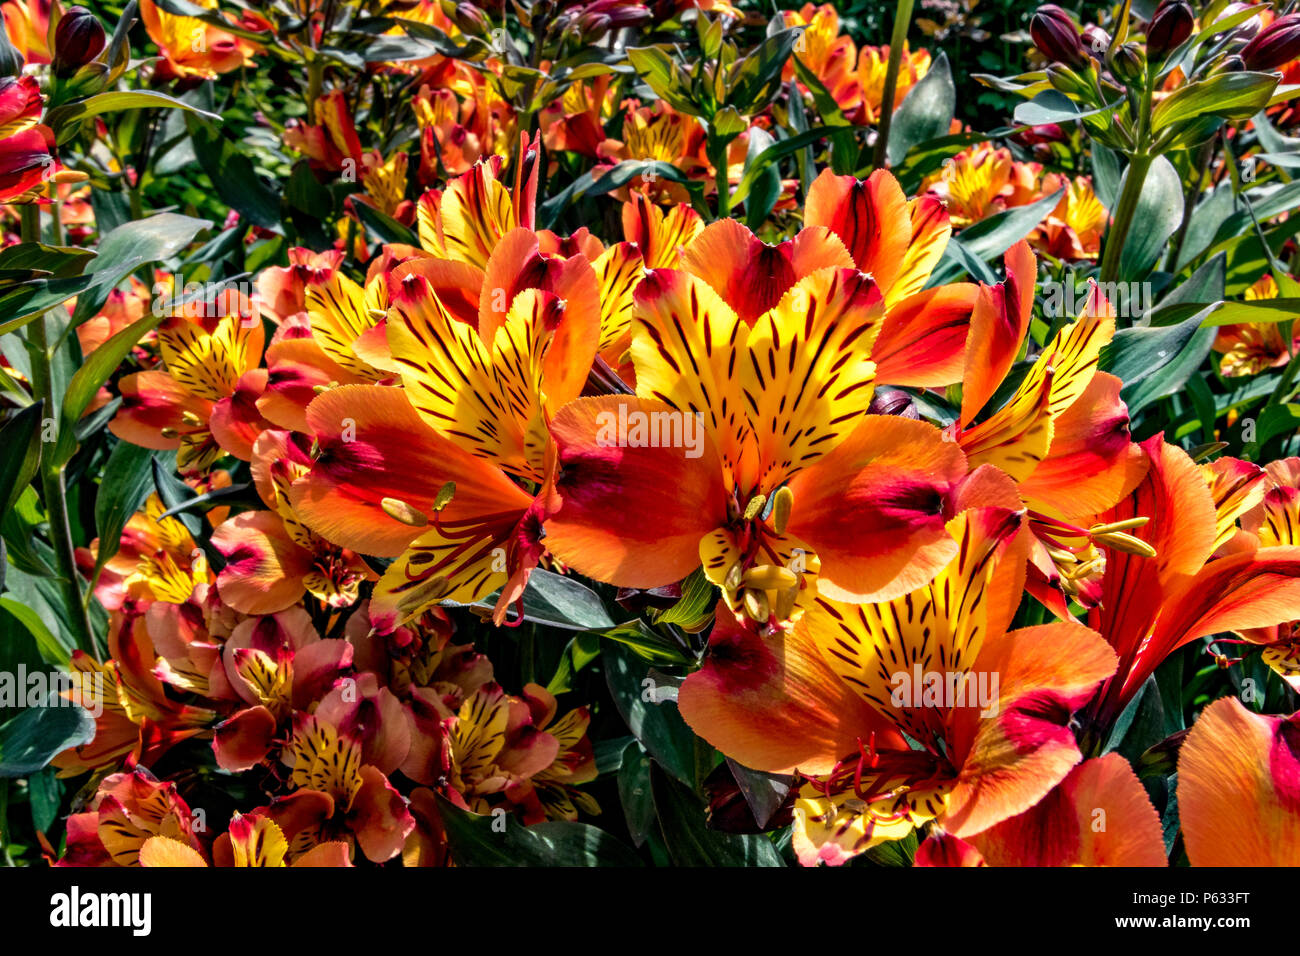 Peruvian lily , Alstroemeria Indian Summer Tesronto , a herbaceous perennial with funnel-shaped ,orange and yellow flowers, UK Stock Photo